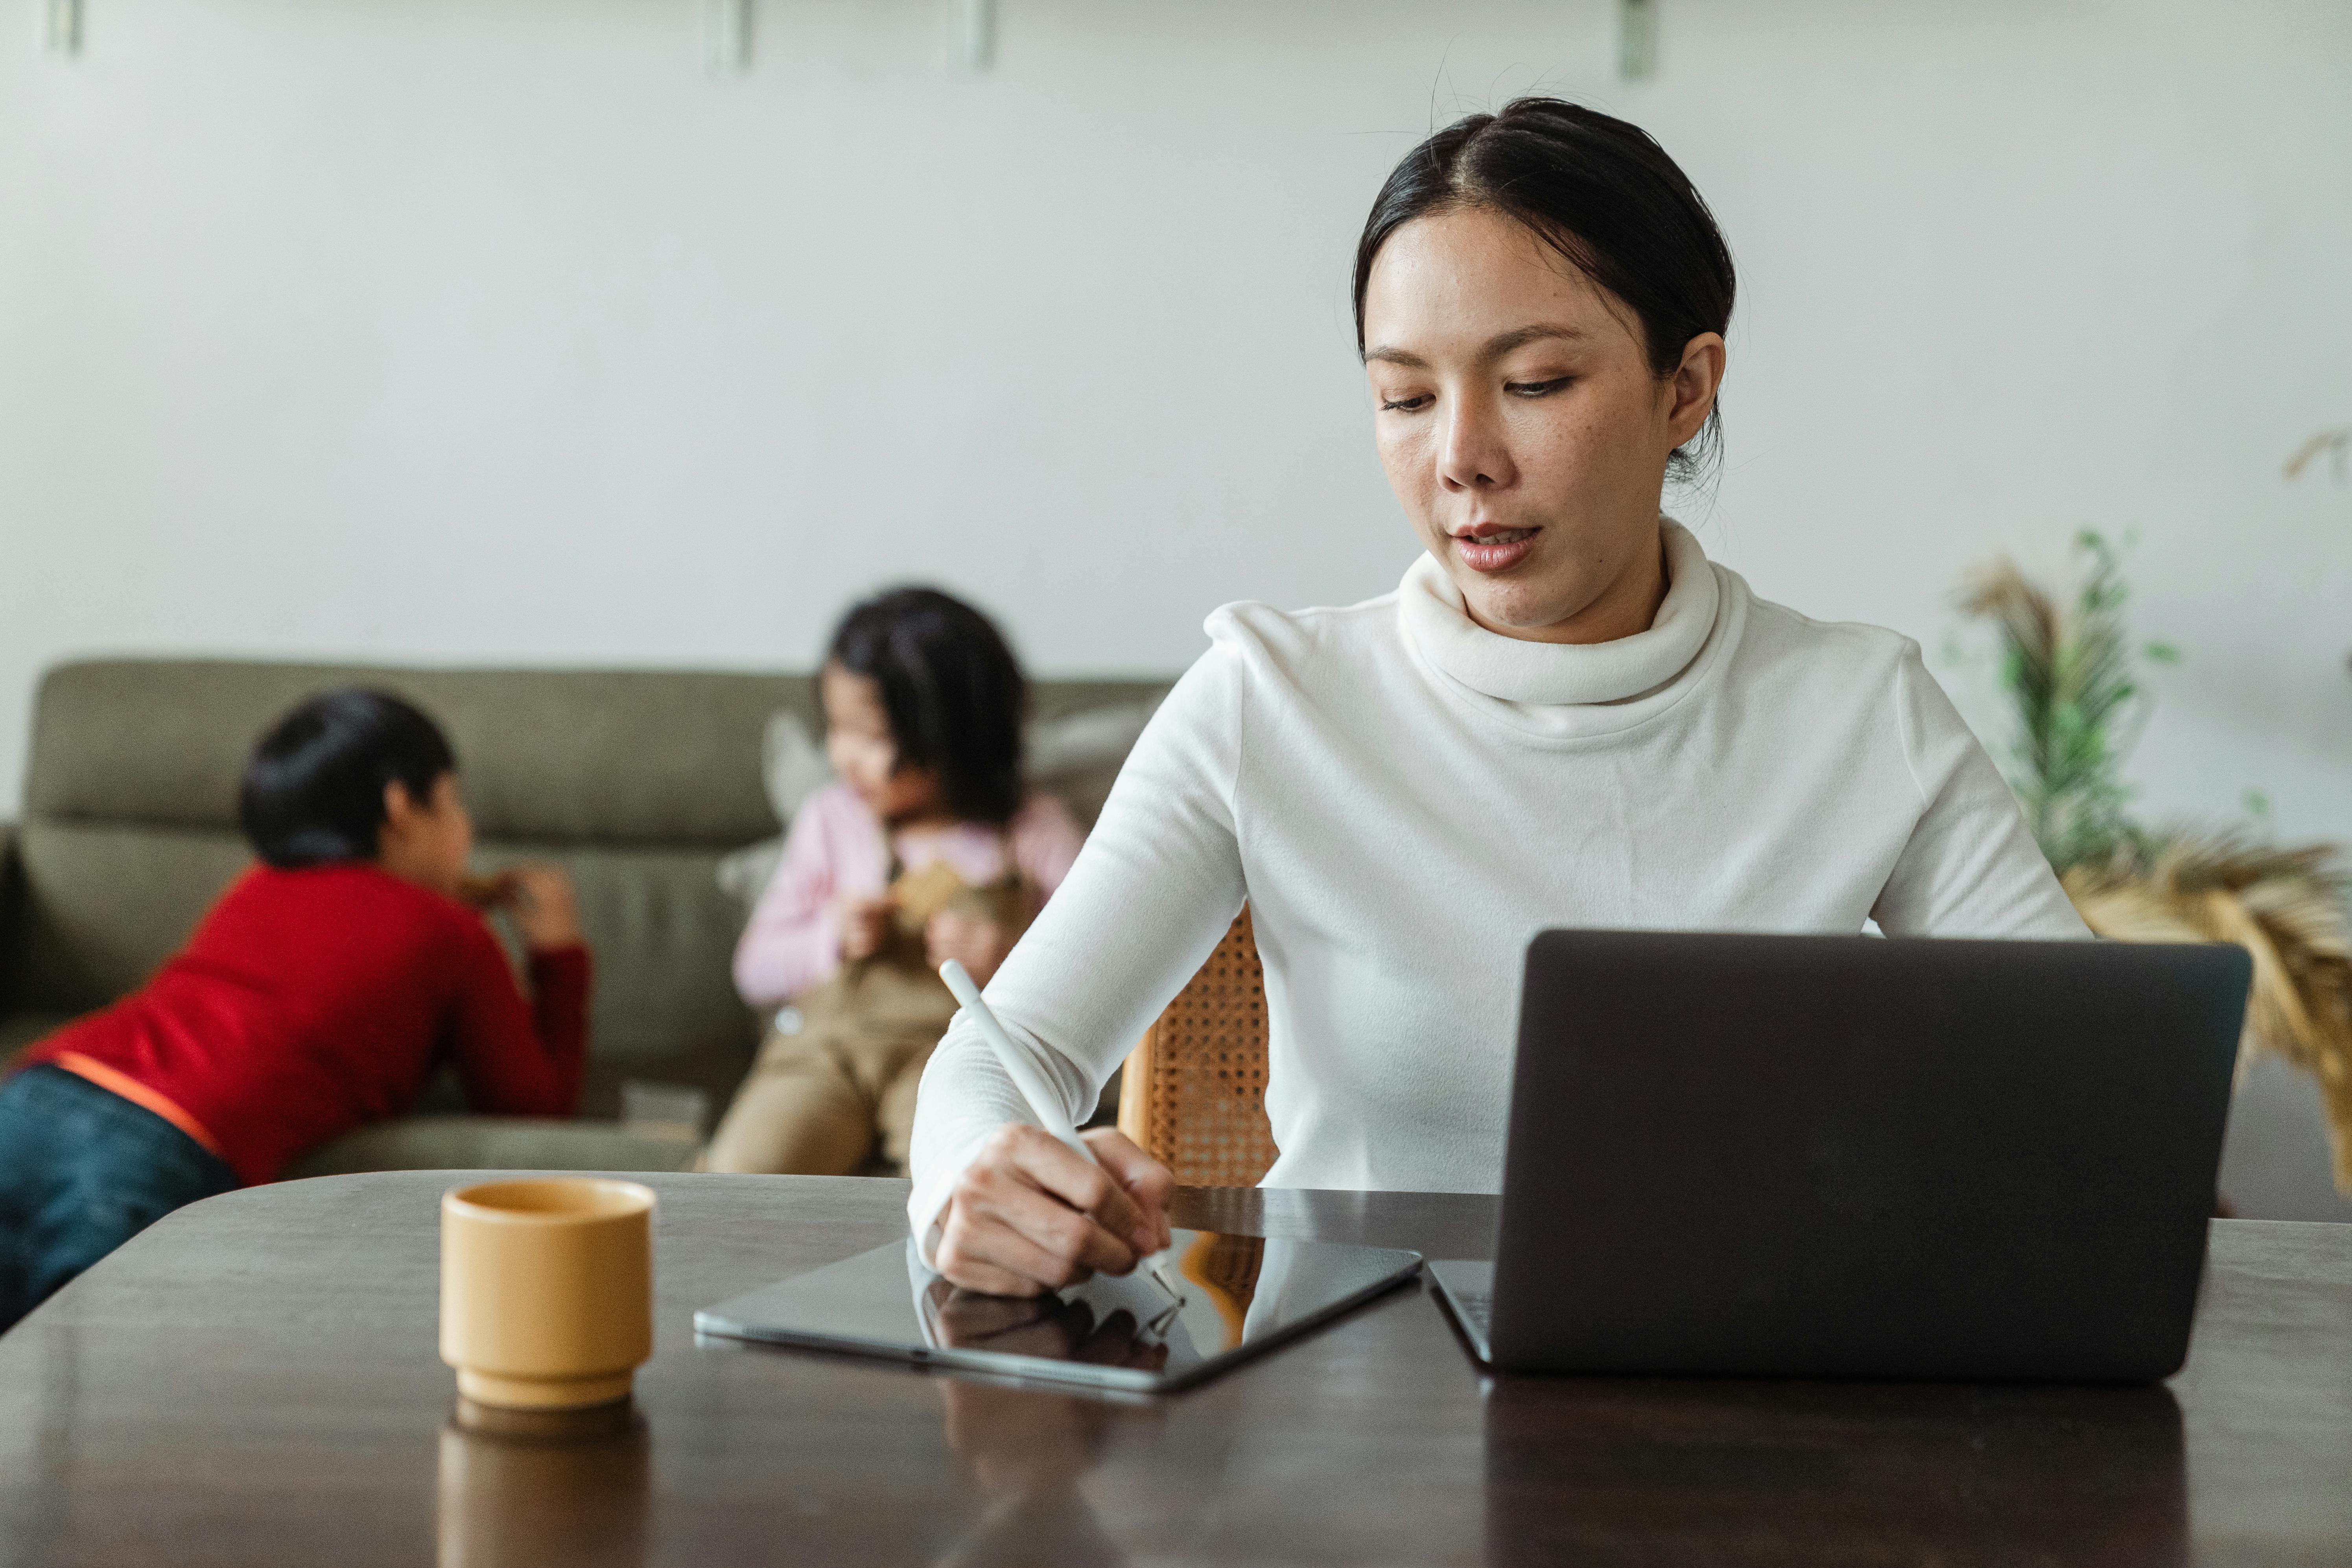 working ethnic mother using tablet and laptop at home with playing kids on background